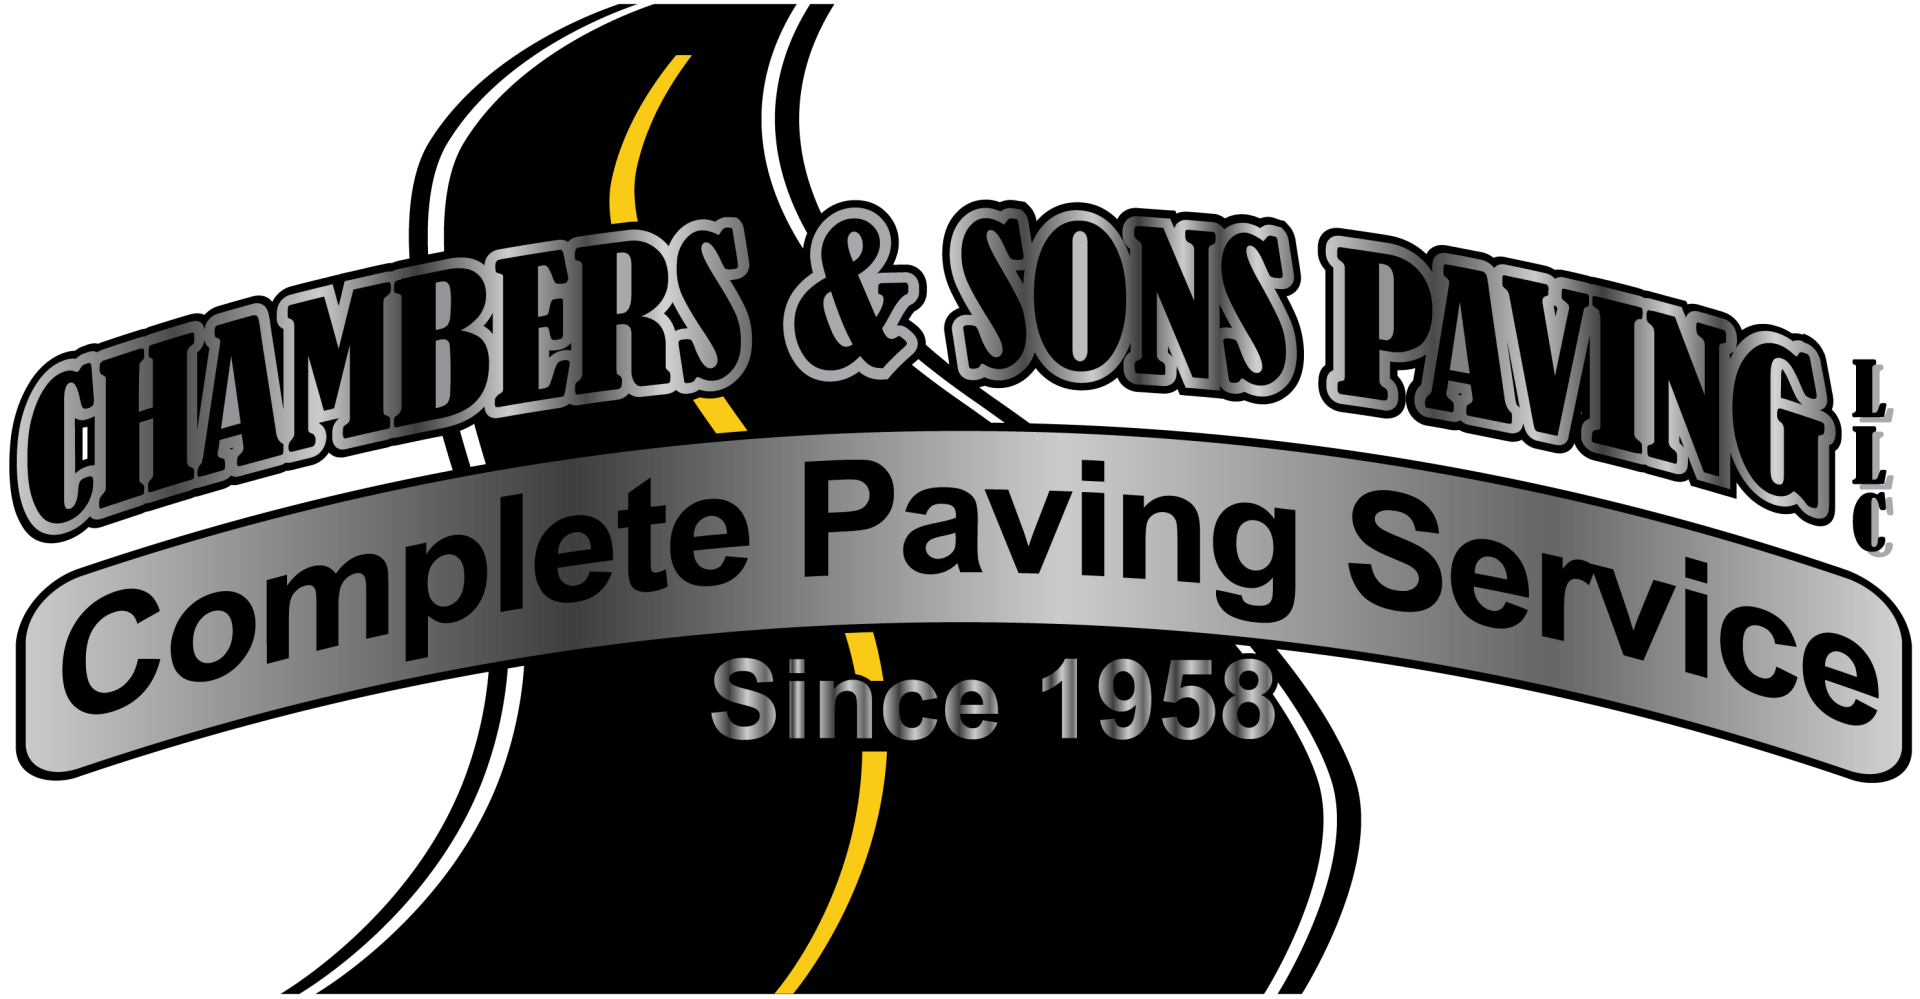 the logo for chambers & sons paving complete paving service since 1958